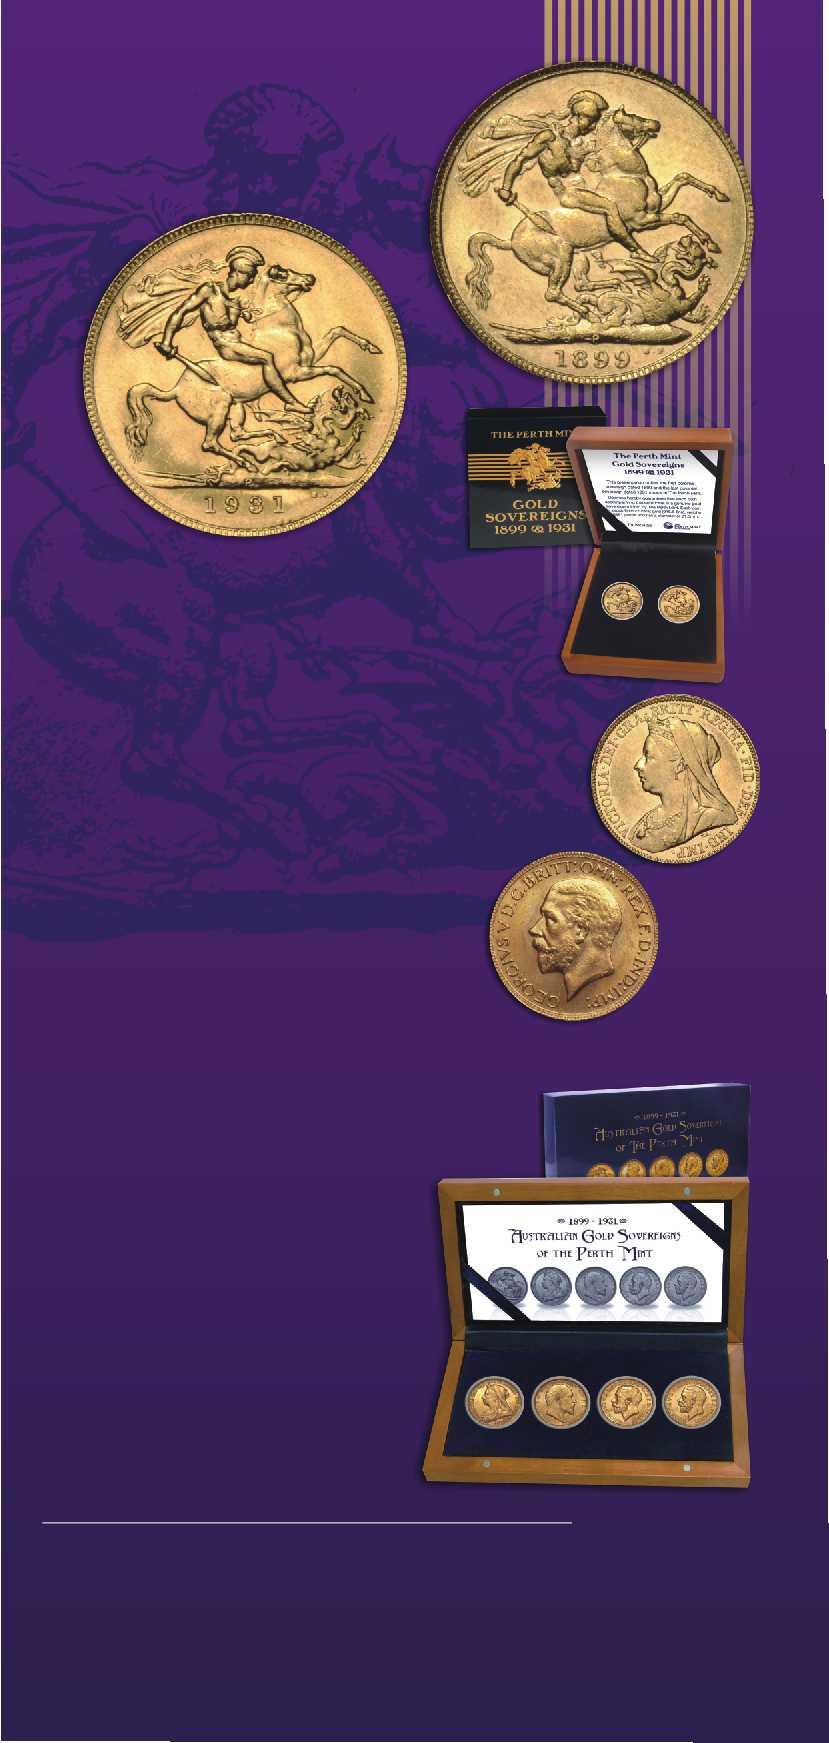 Australian Gold Sovereigns of The Perth Mint The prestigious and historic Perth Mint Sovereigns have been made available as a two or four-coin set.